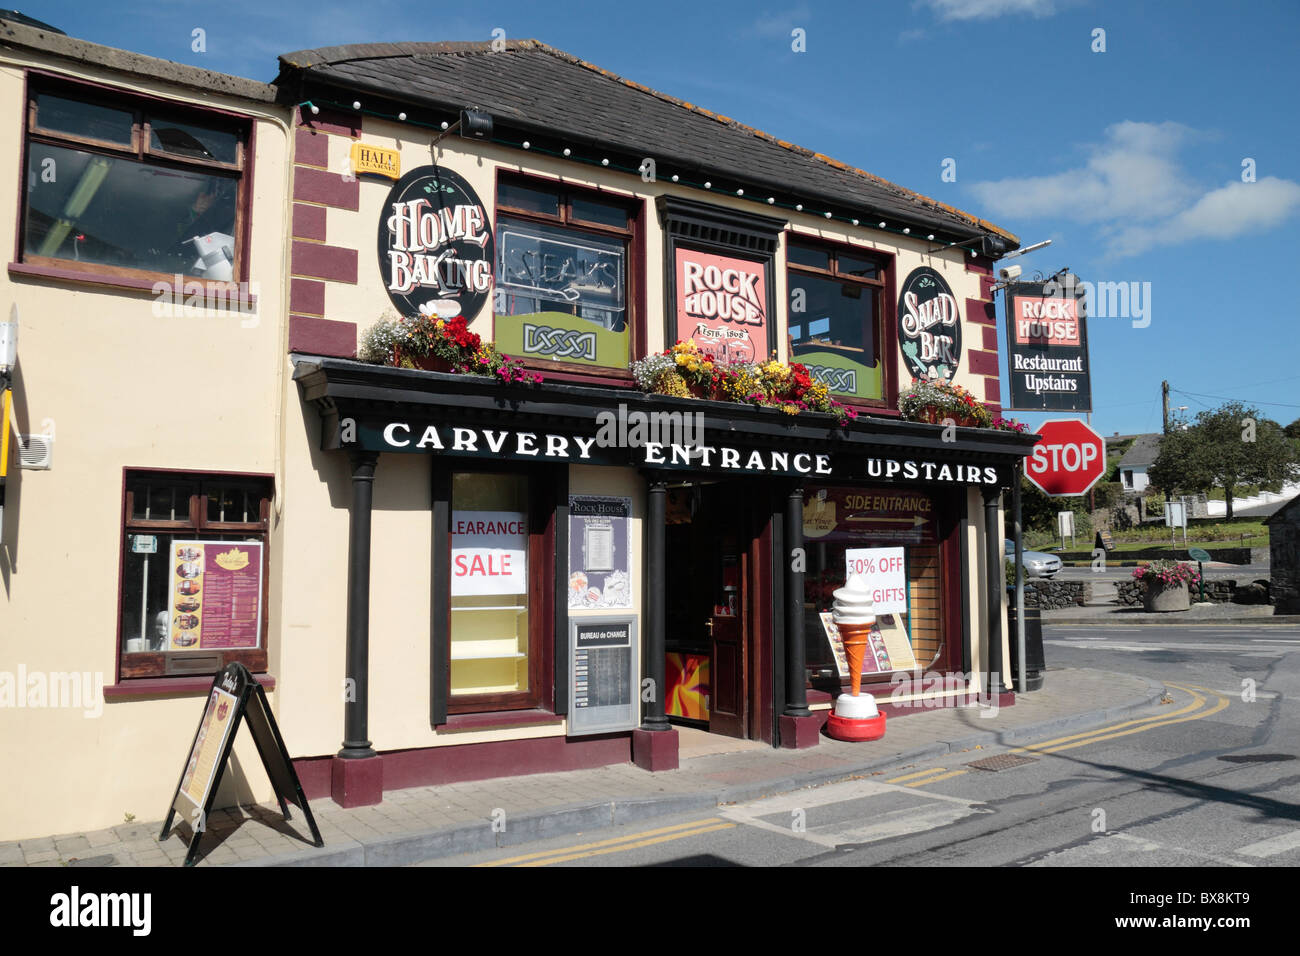 Das Rock House Public House in Cashel, Co. Tipperary, Irland (Eire). Stockfoto